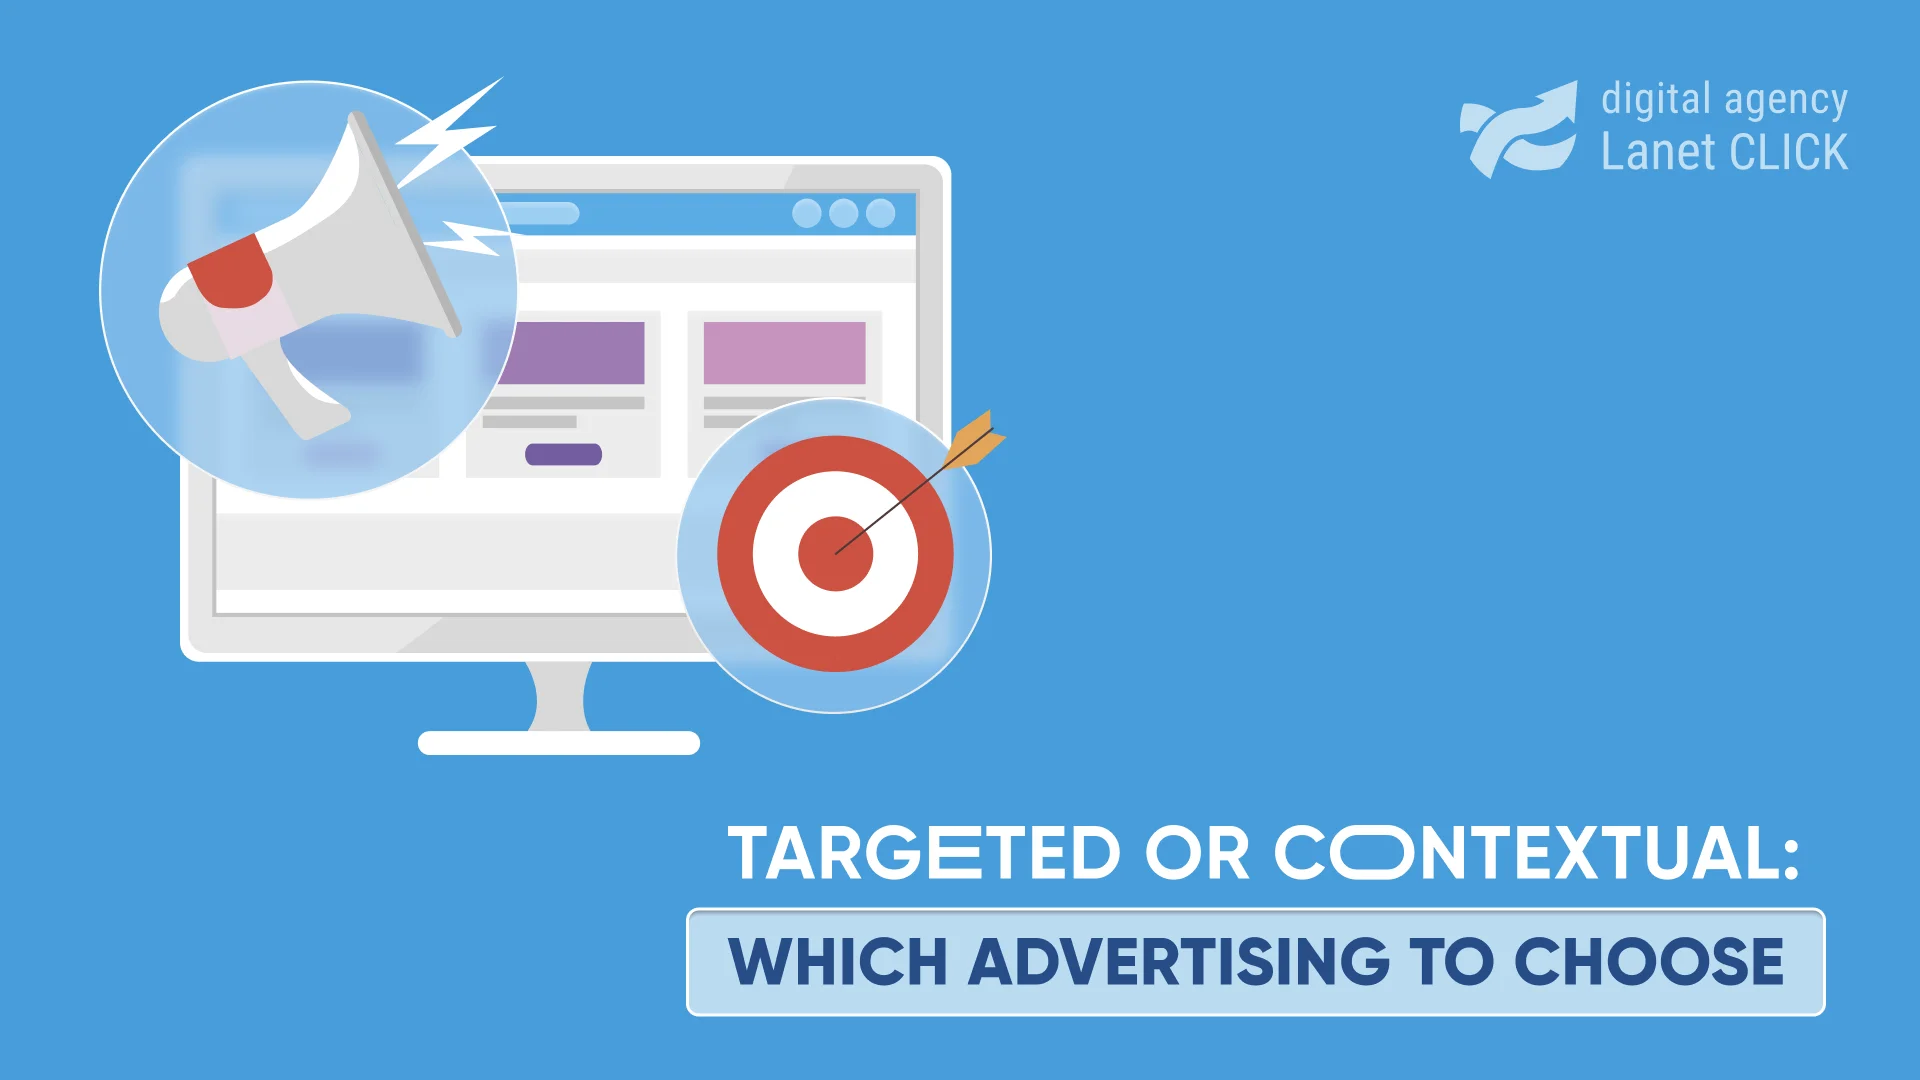 Targeted or contextual: which advertising to choose